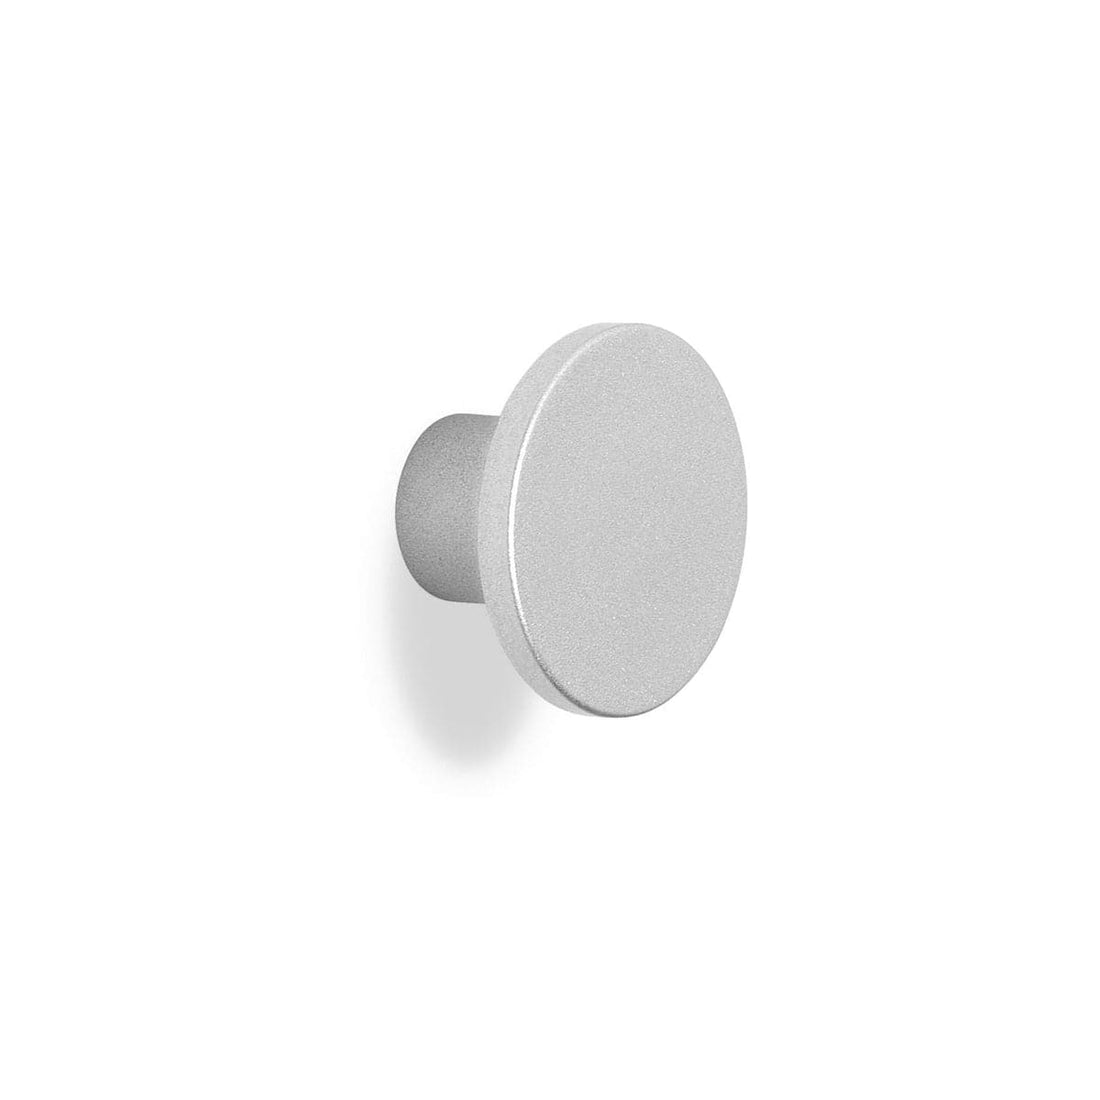 2 KNOBS D 32 MM H 19 MM IN SATIN CHROME RECYCLED PLASTIC